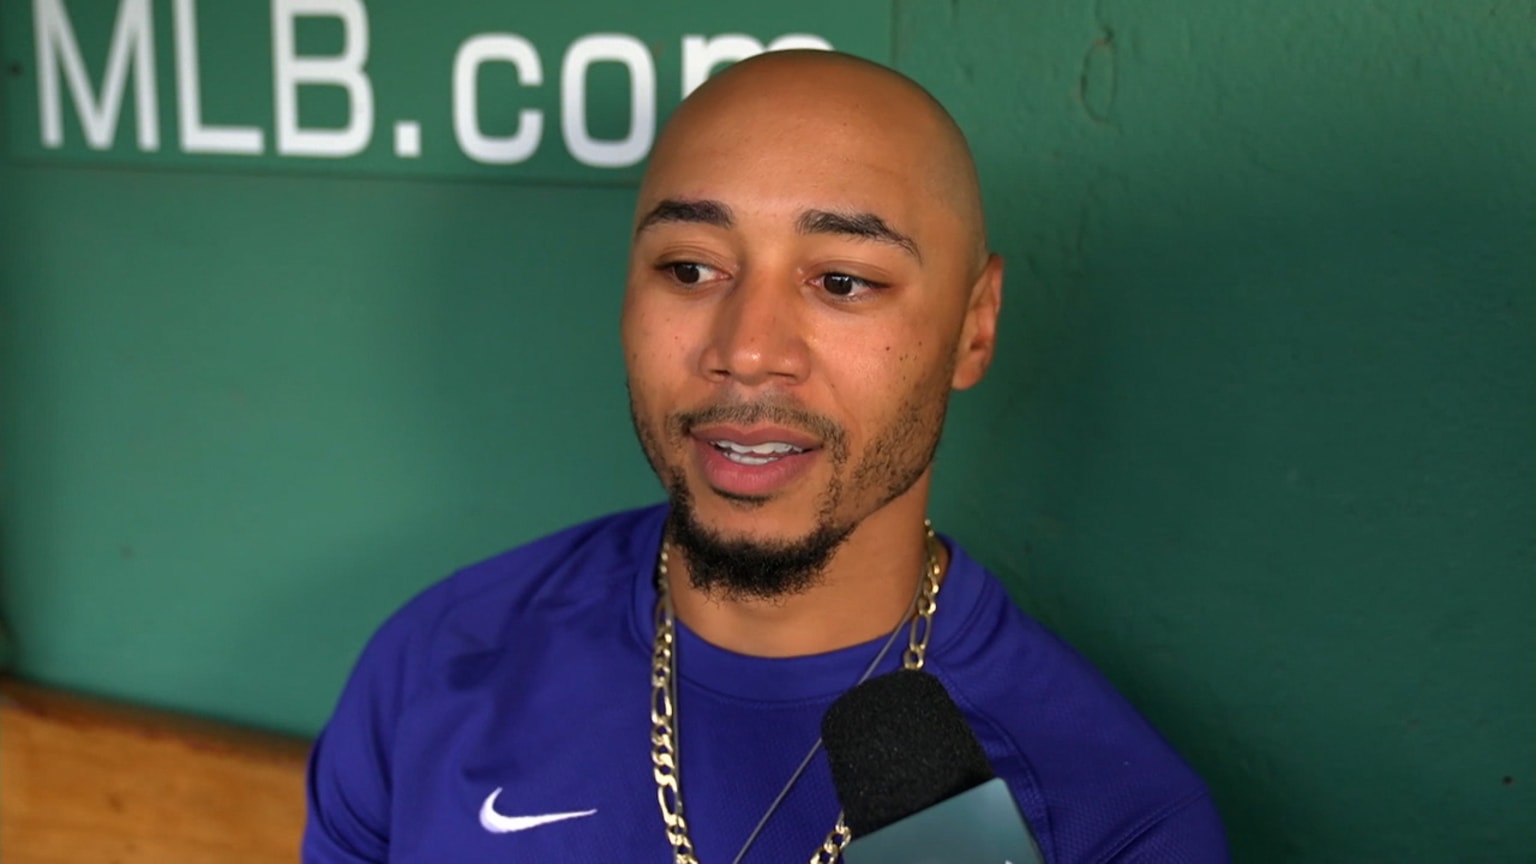 Dodgers: Mookie Betts GQ interview gives insight on why he left Boston